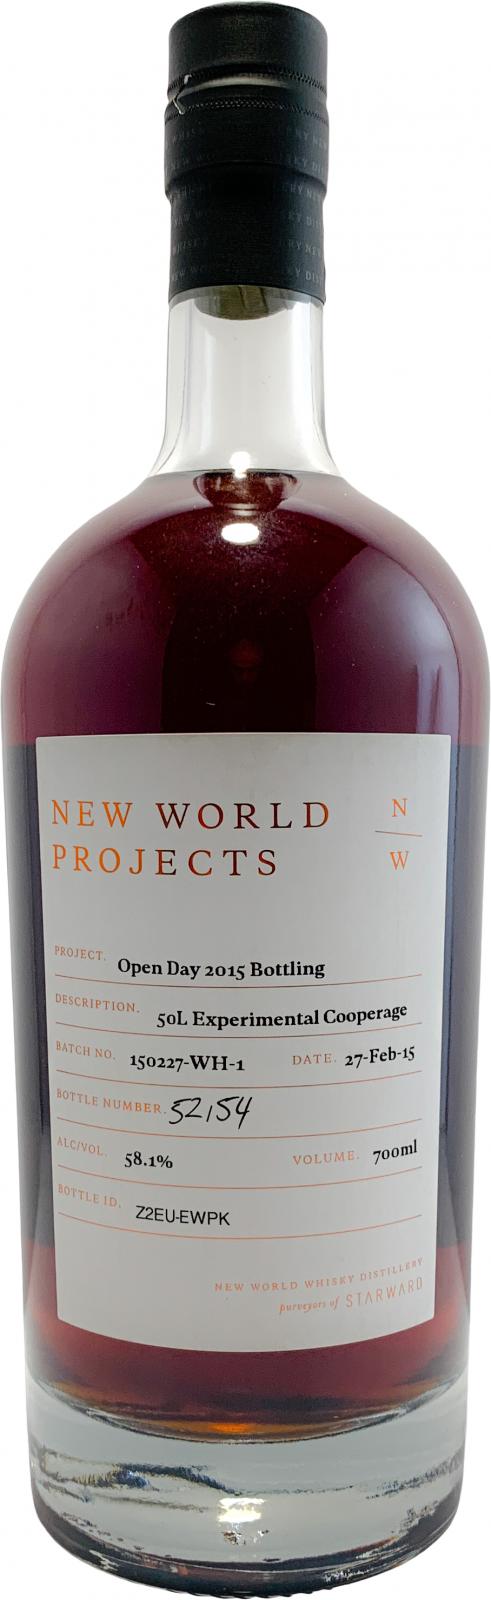 New World Projects Open Day 2015